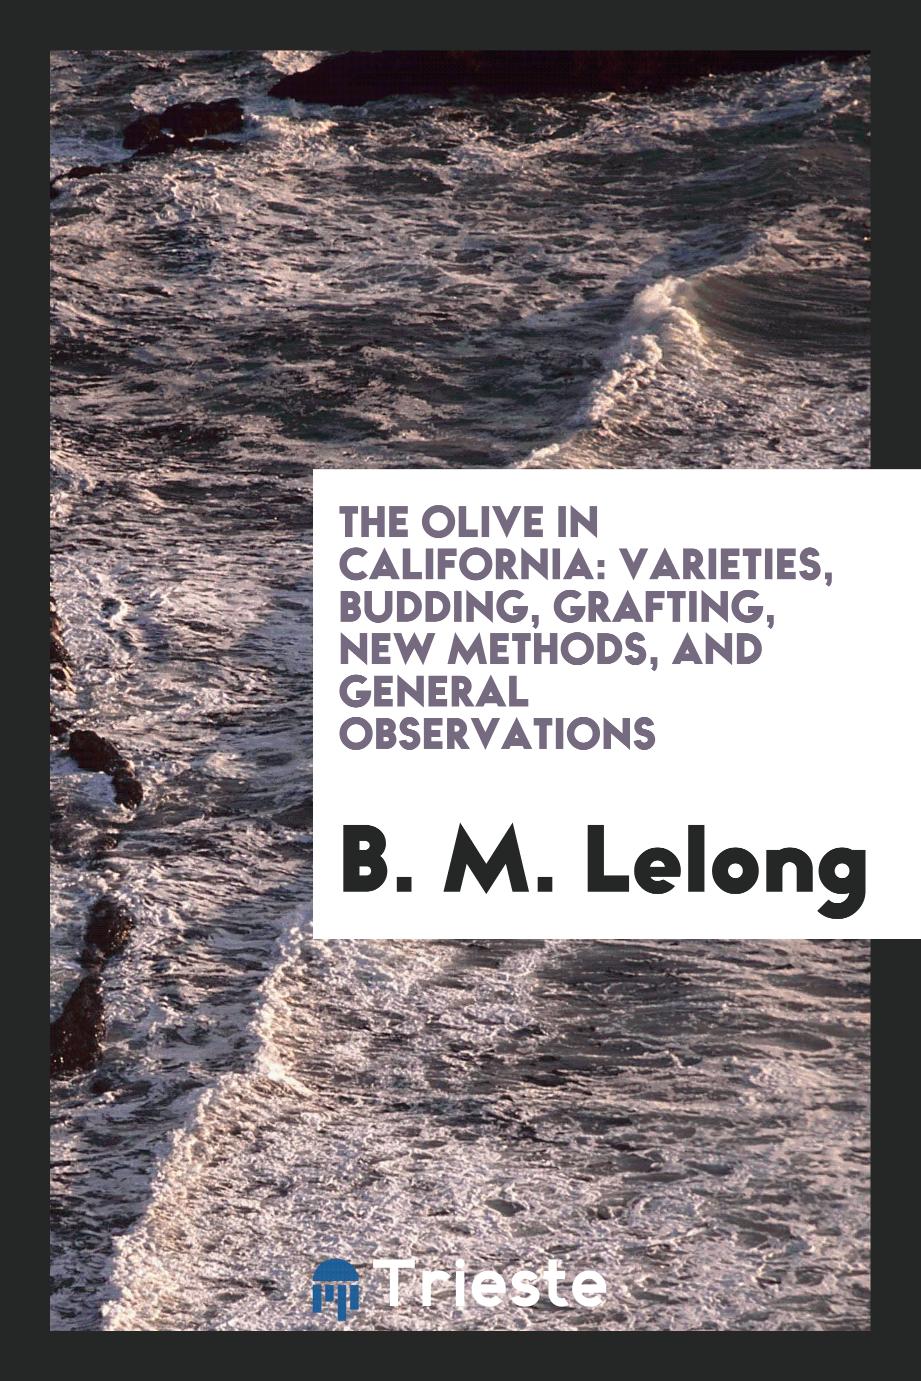 The Olive in California: Varieties, Budding, Grafting, New Methods, and General observations